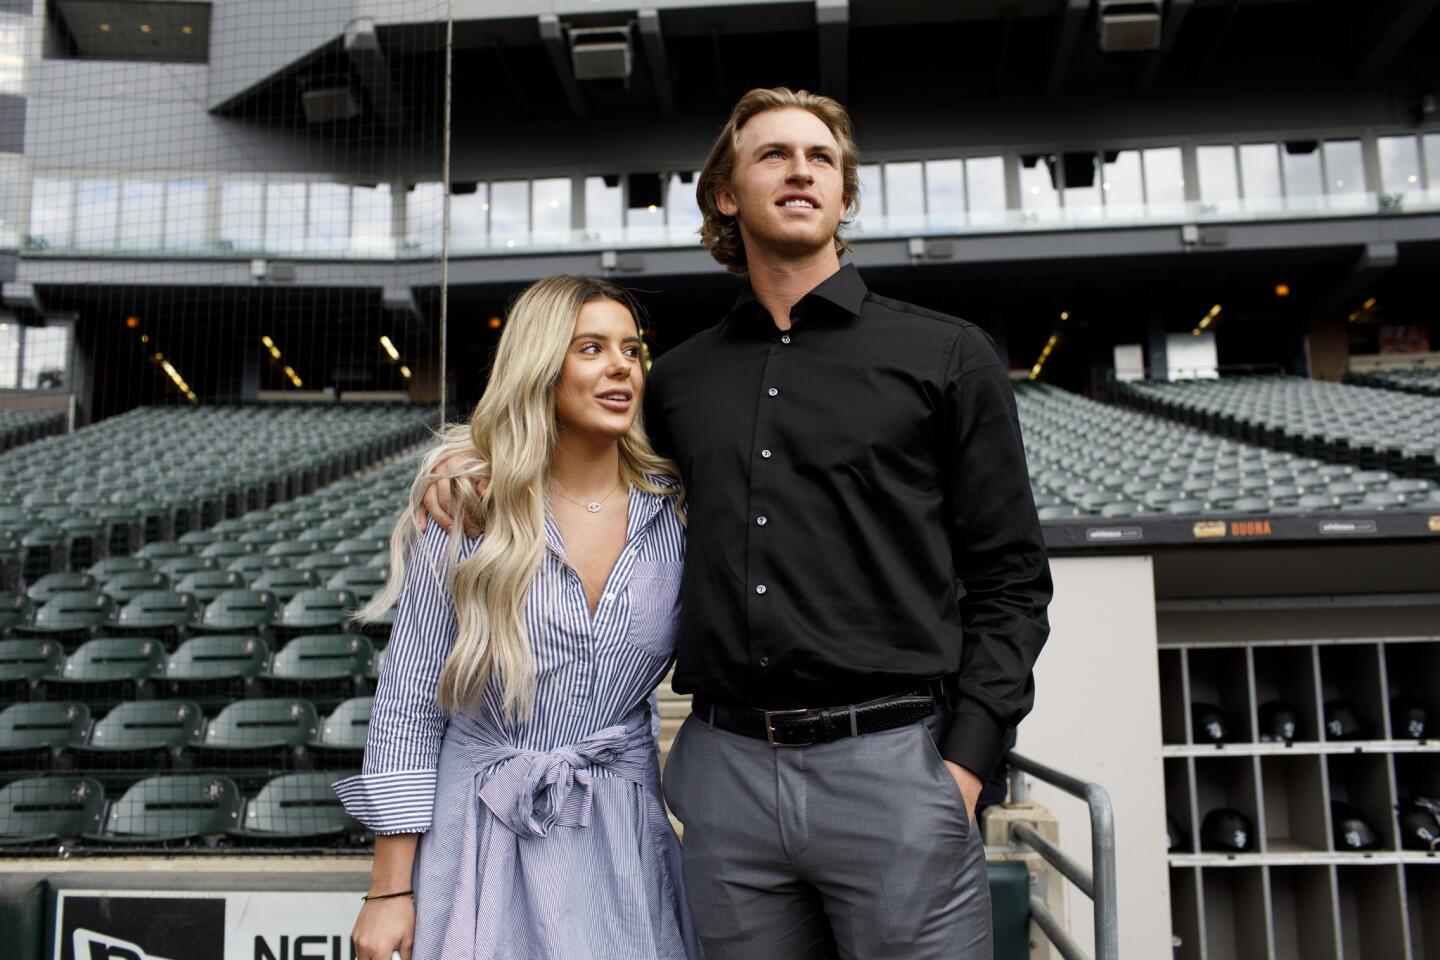 Brielle Biermann and Michael Kopech stand on the field at Guaranteed Rate Field before a White Sox game on Sept. 6, 2017.